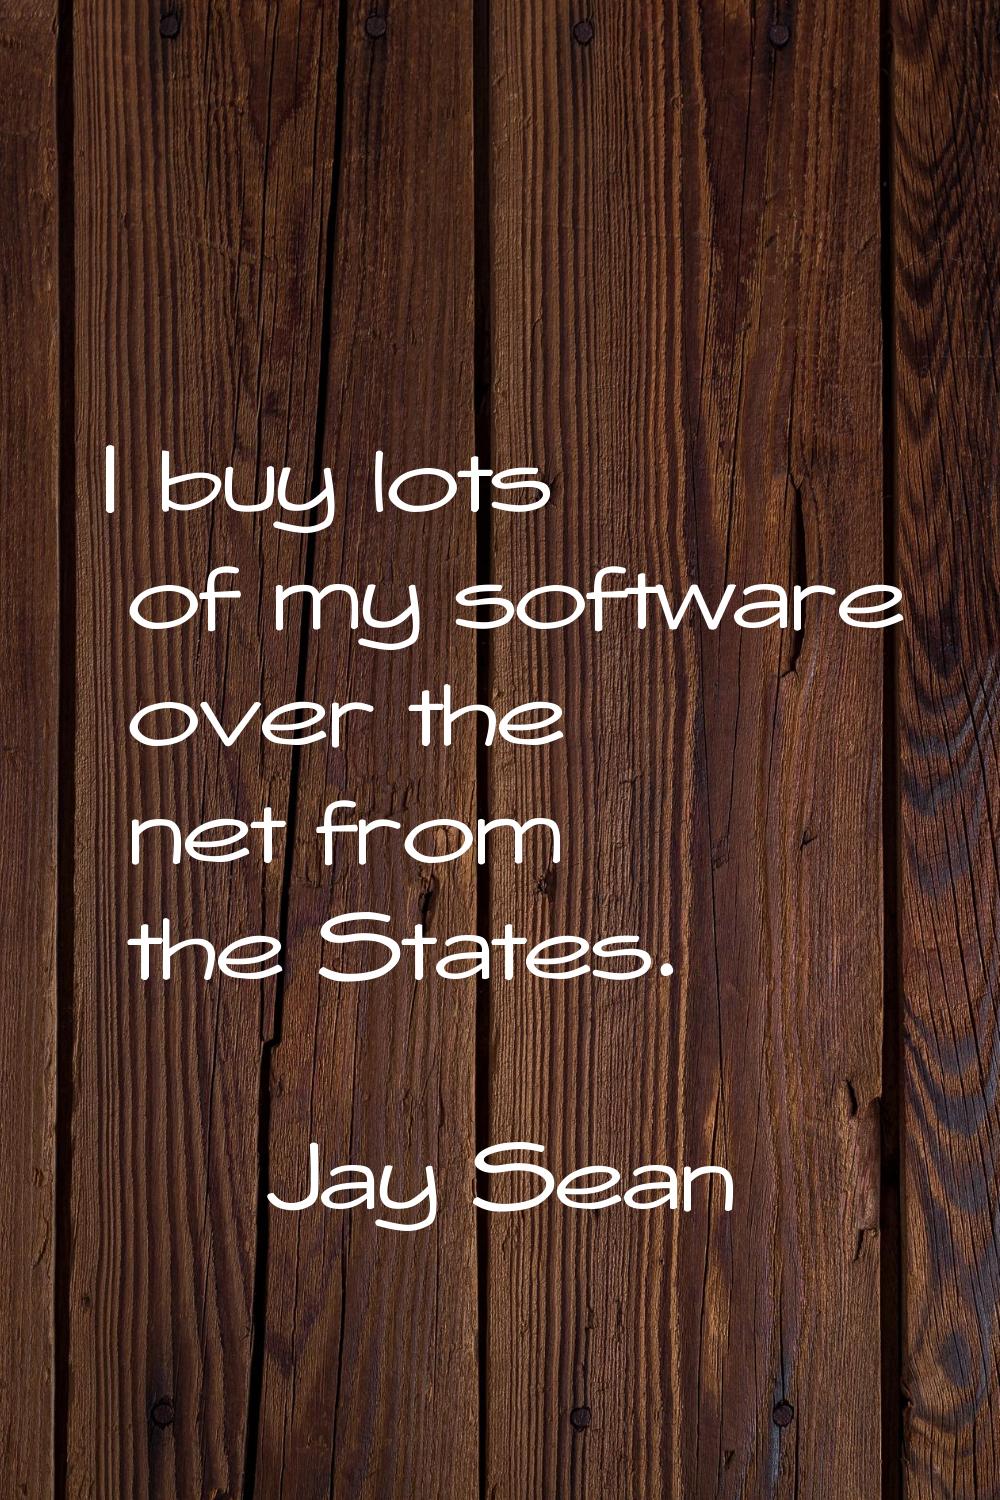 I buy lots of my software over the net from the States.